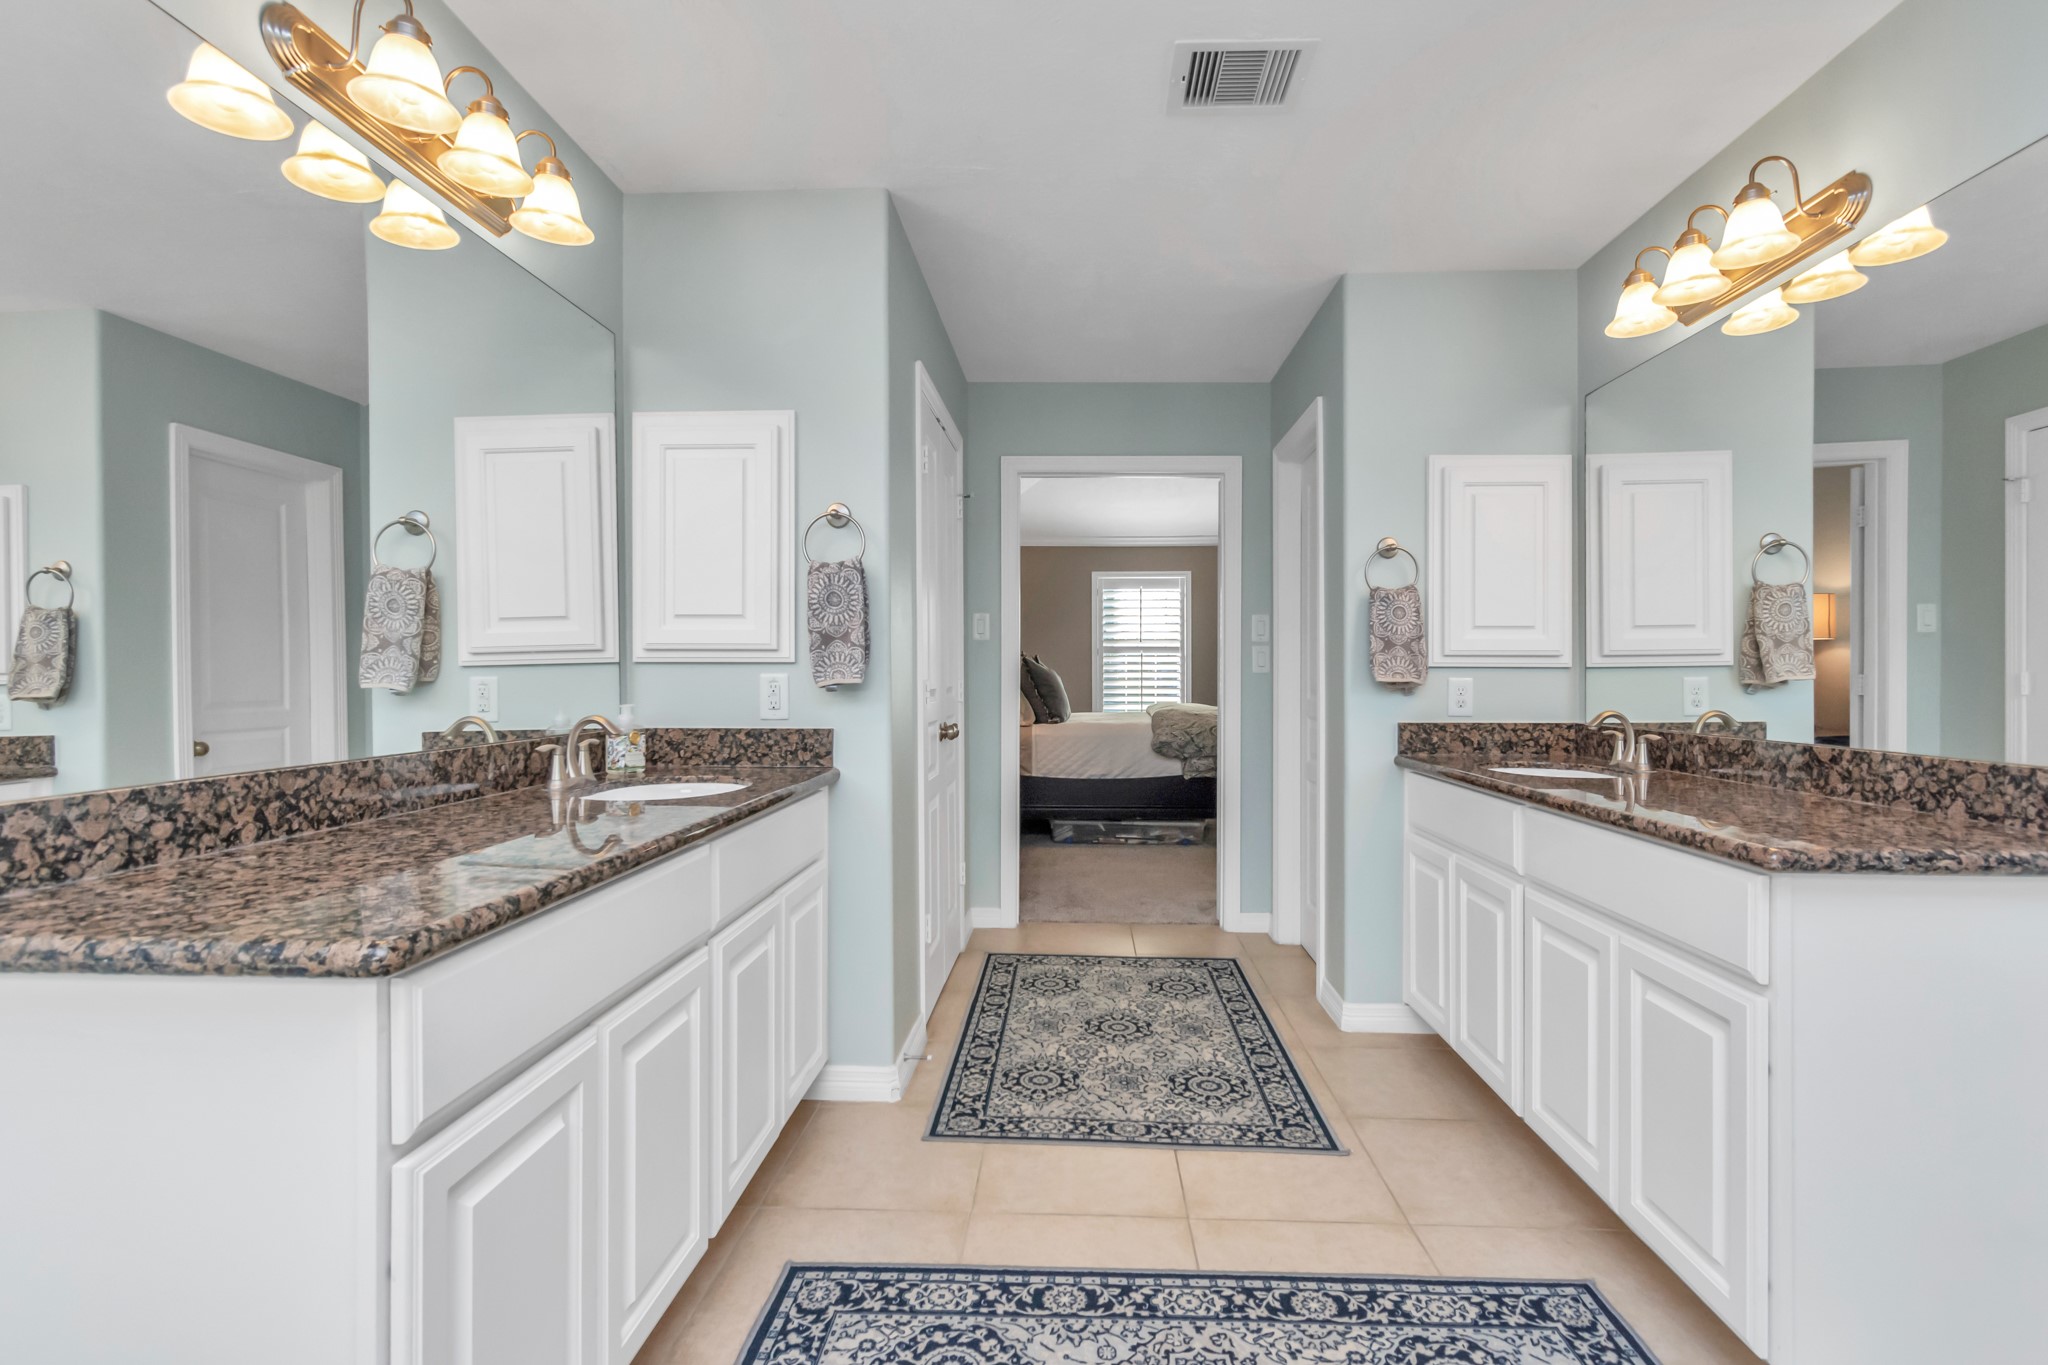 Dual sinks adorned with granite counters ensure ample space for everyone's needs.